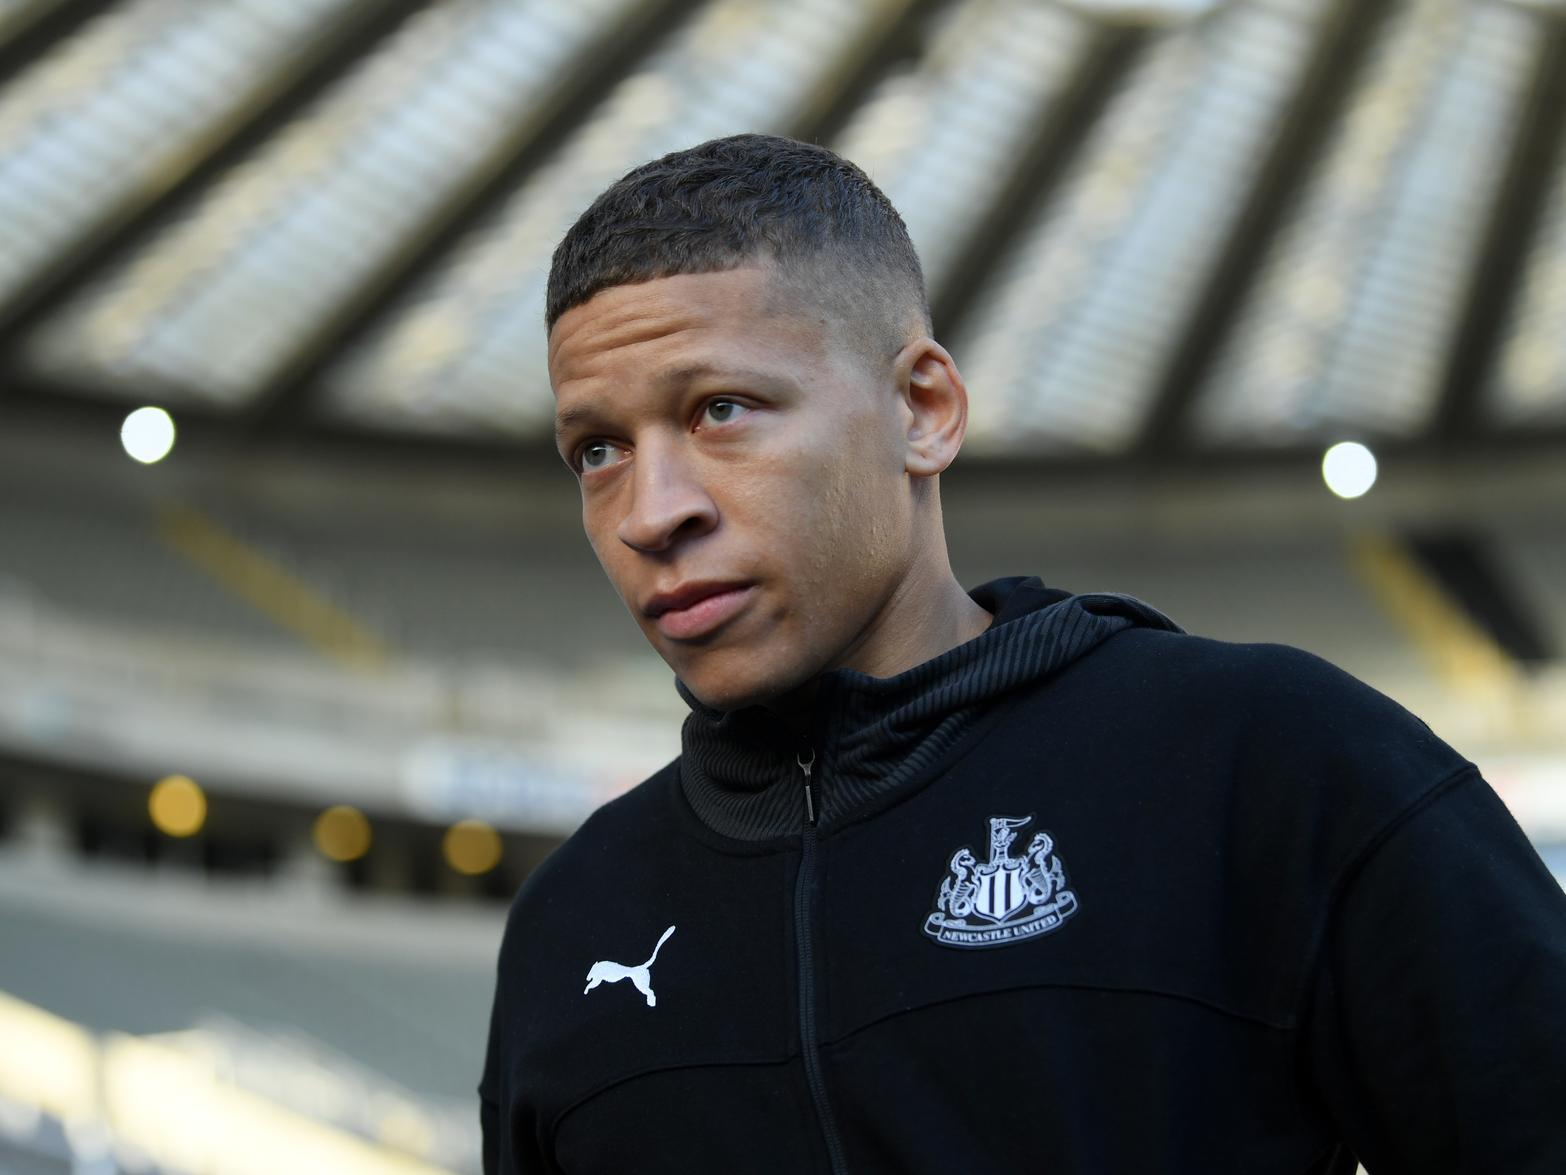 Leeds United have been made the bookies' new joint-favourites to sign Newcastle United's Dwight Gayle this month, after being frustrated in their pursuit of Southampton's Che Adams. (Sky Bet)